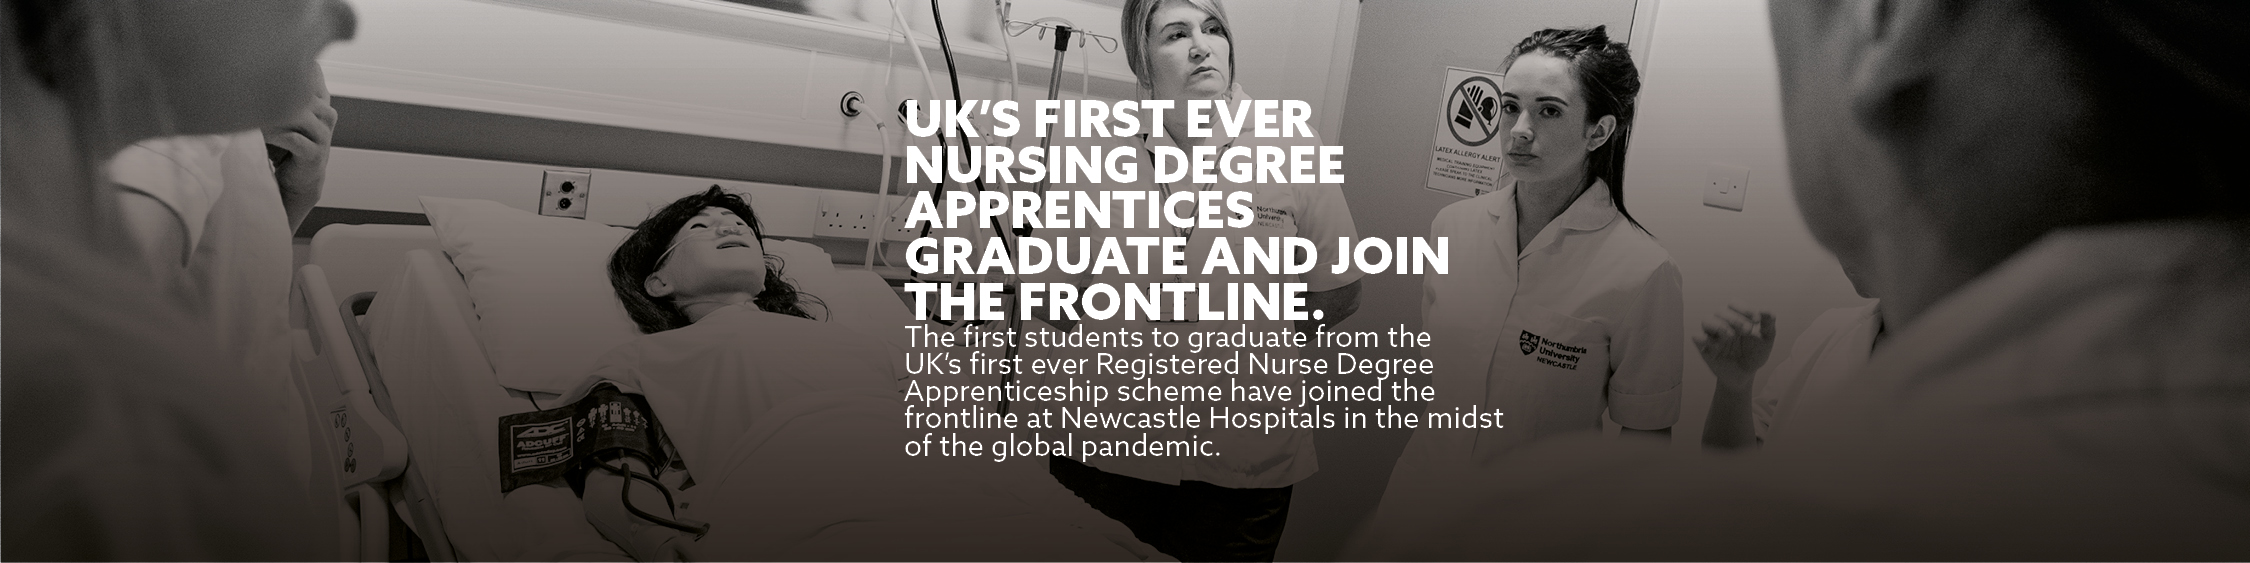 UK's first Nursing degree apprentices graduate and join the frontline